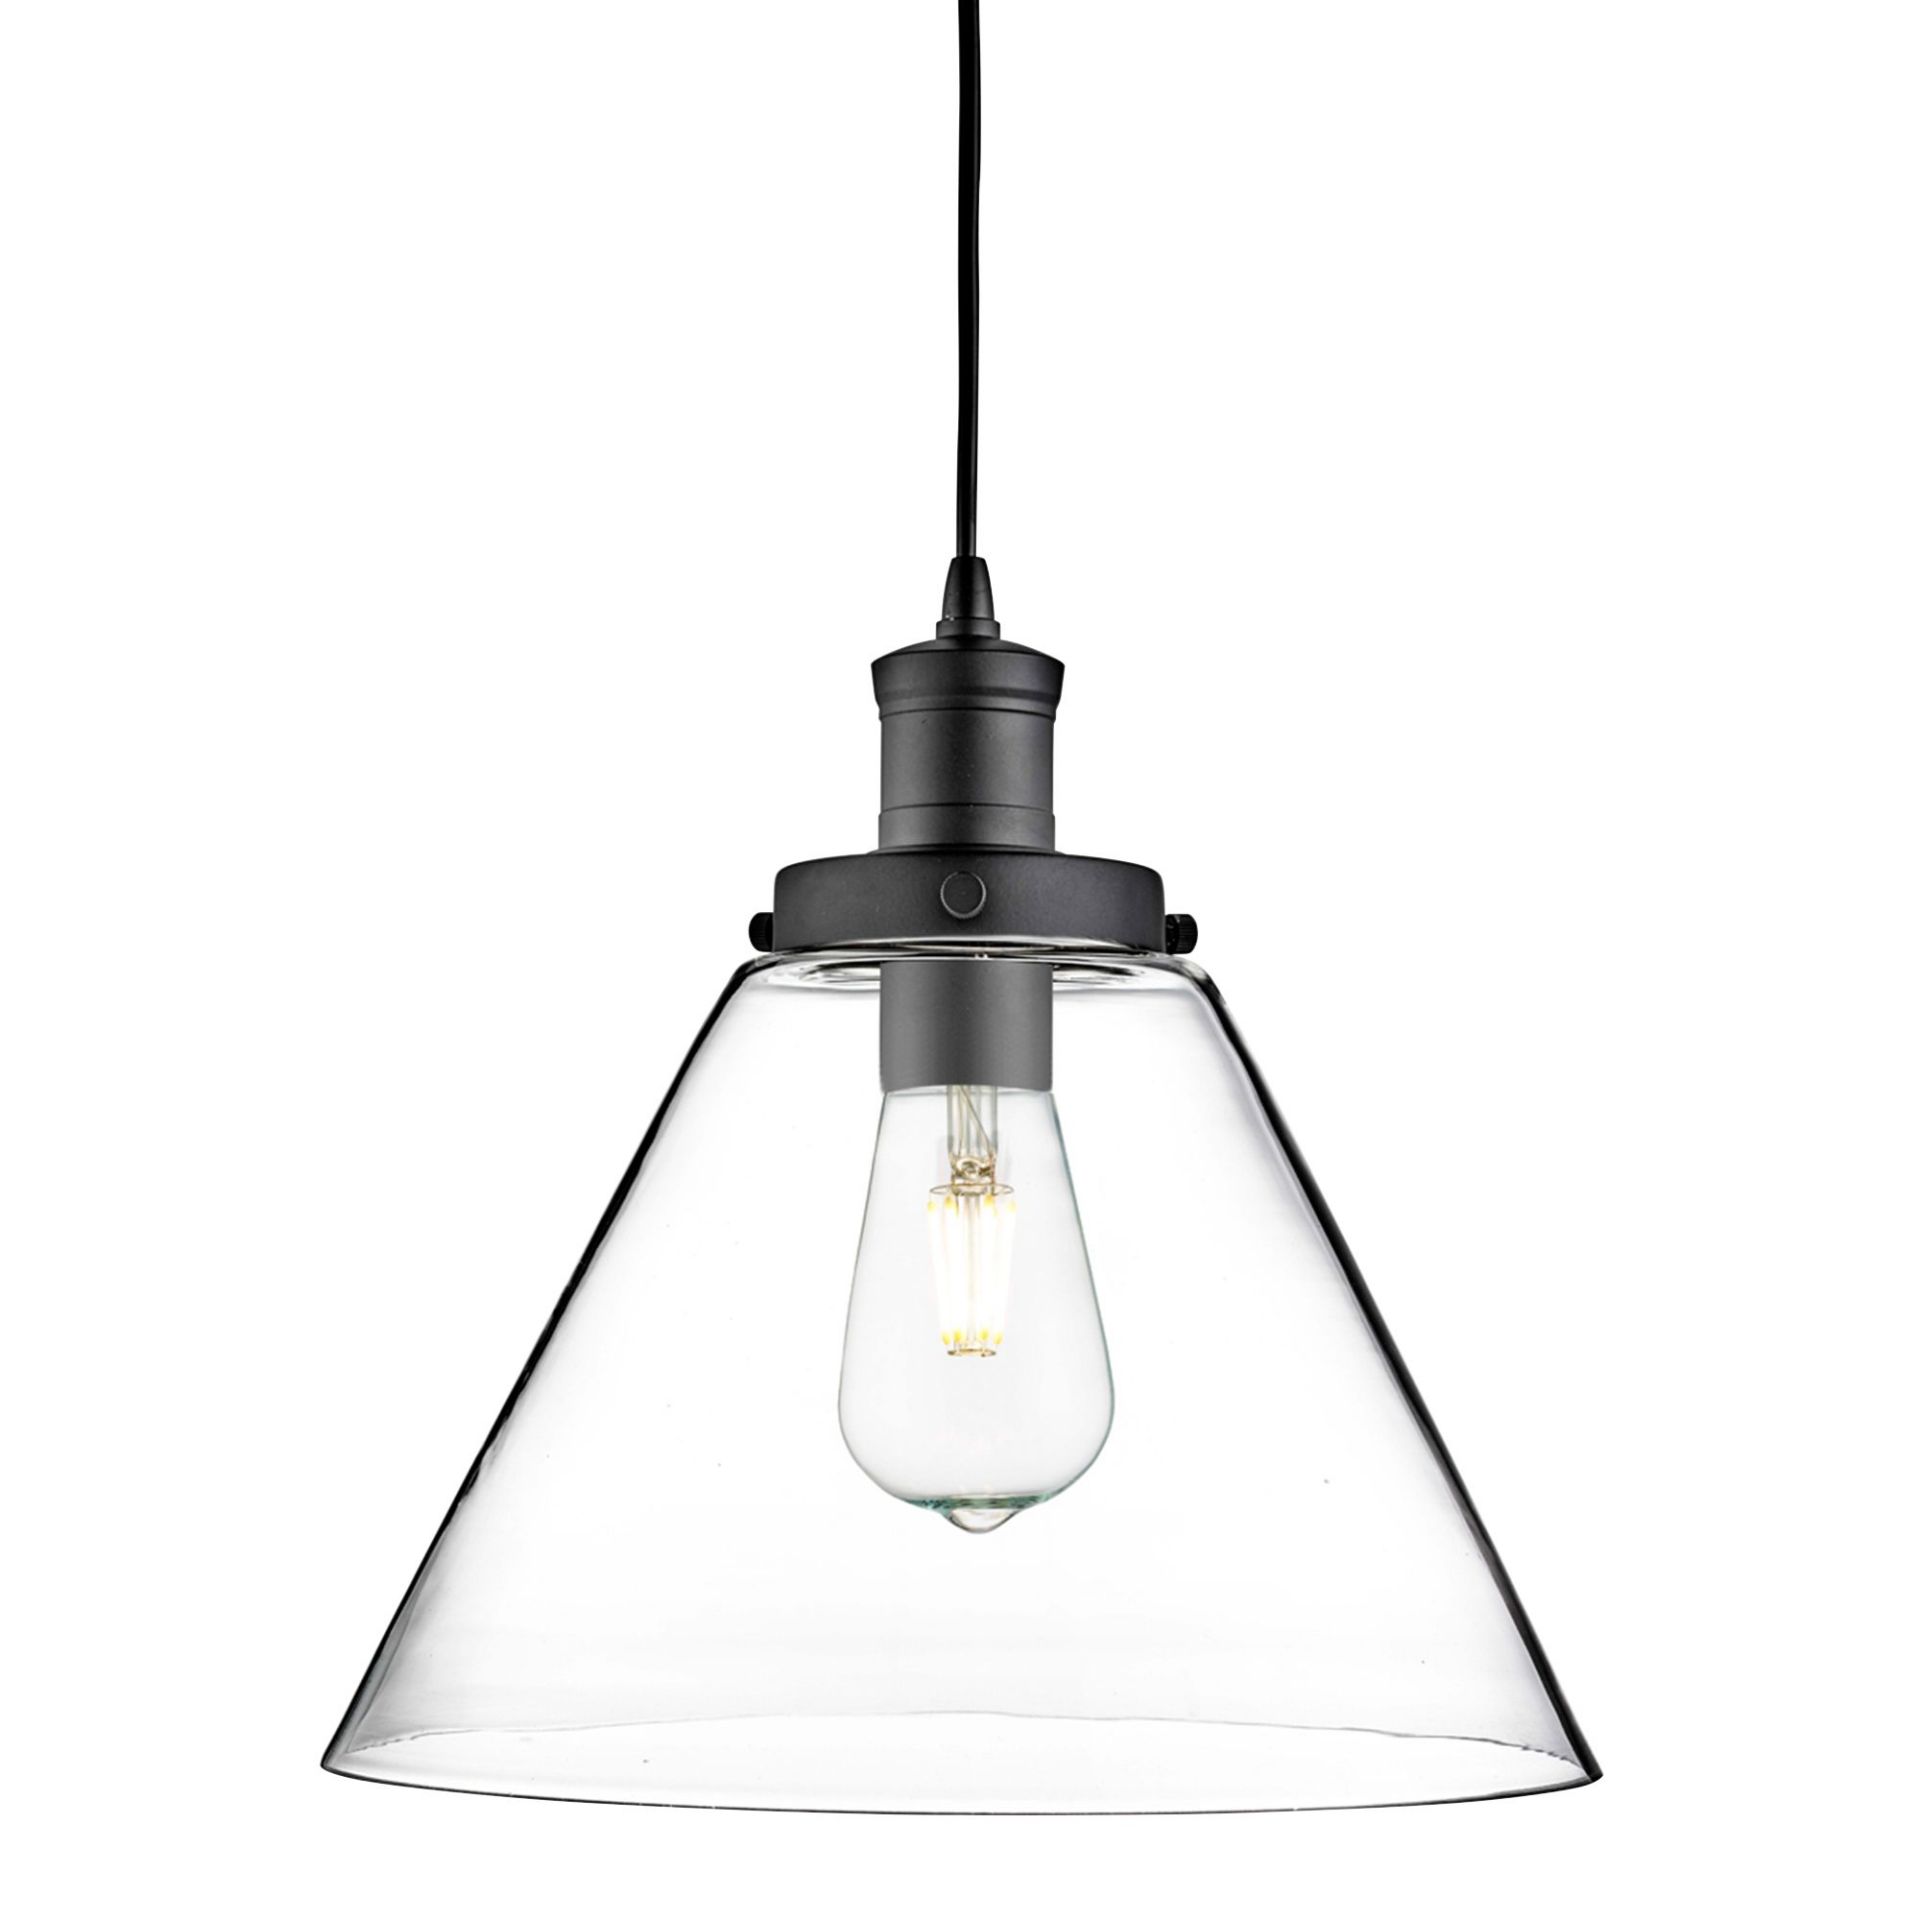 1 x Pyramid Black Pendant Light With Clear Glass Shade - New Boxed Stock - CL323 - Ref: 3228BK - WH1 - Image 2 of 2